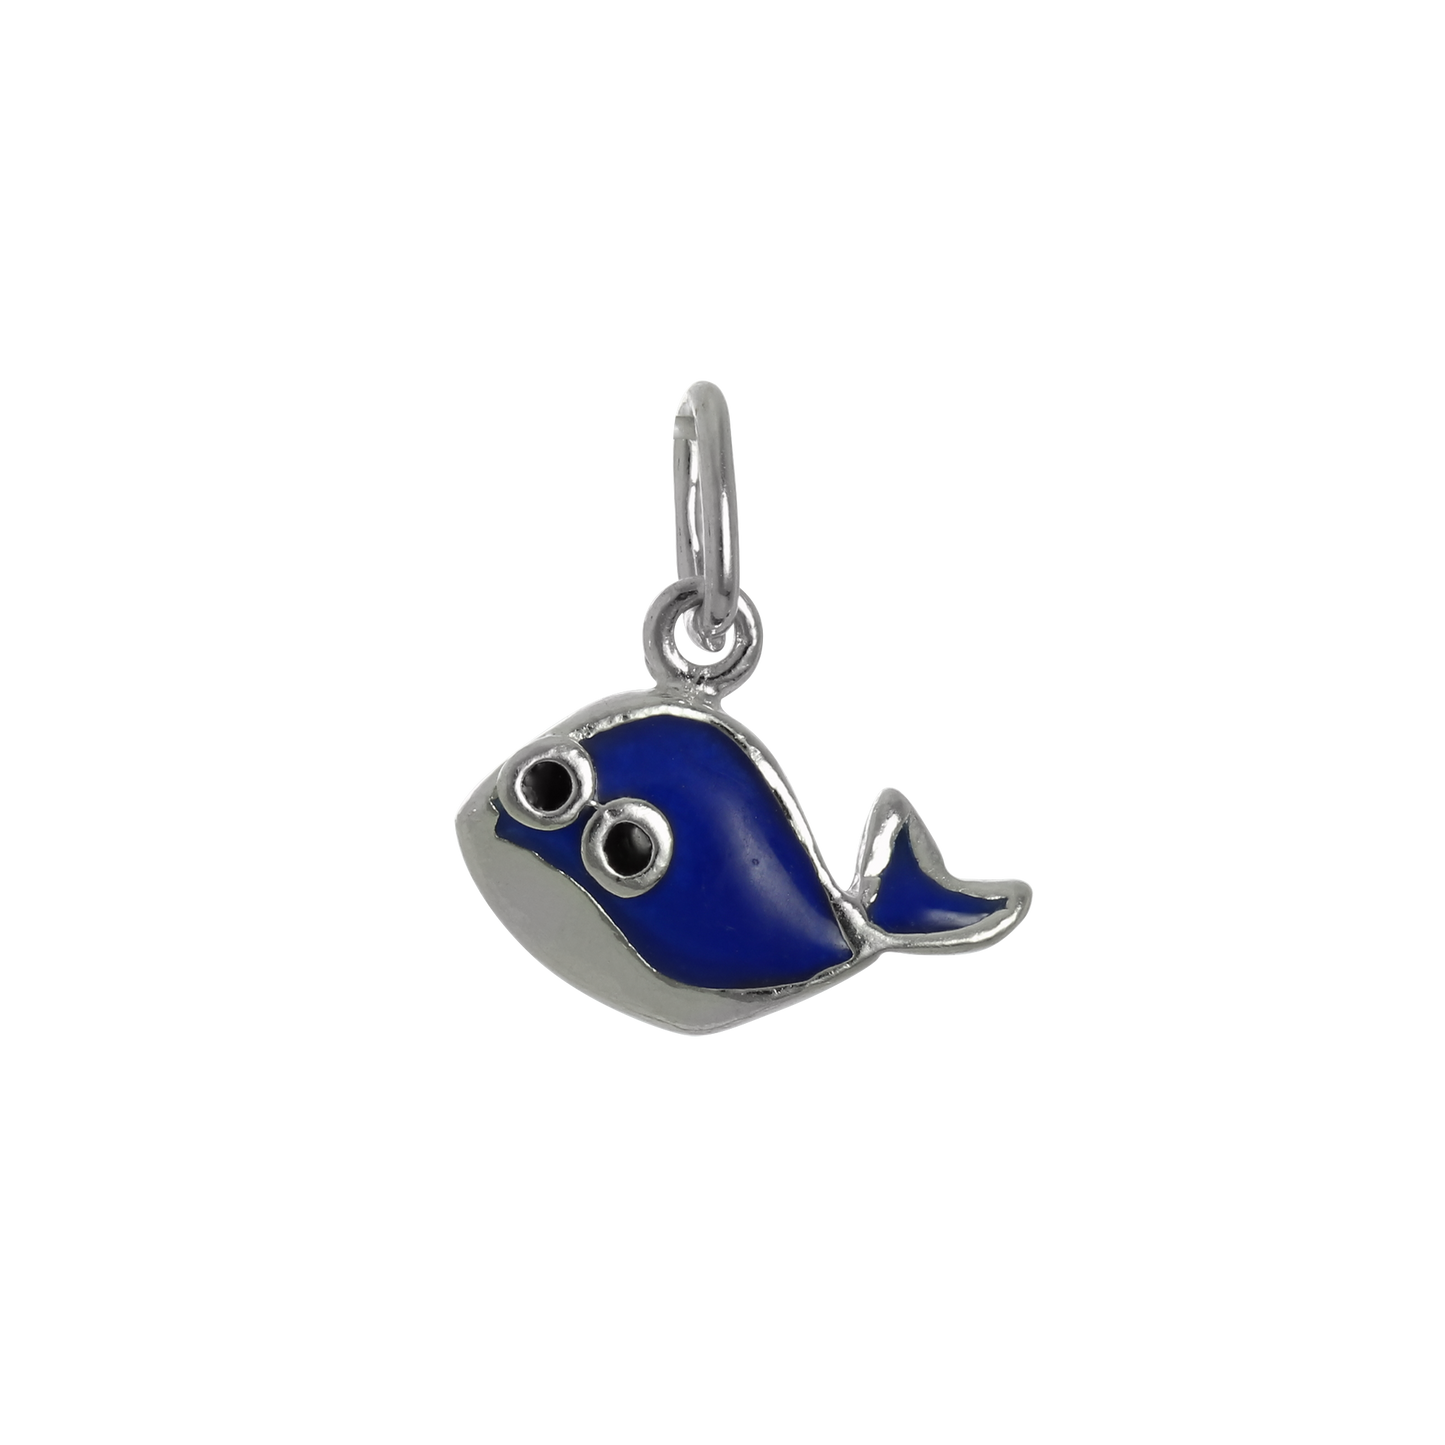 Small Sterling Silver & Blue Enamel Whale Charm